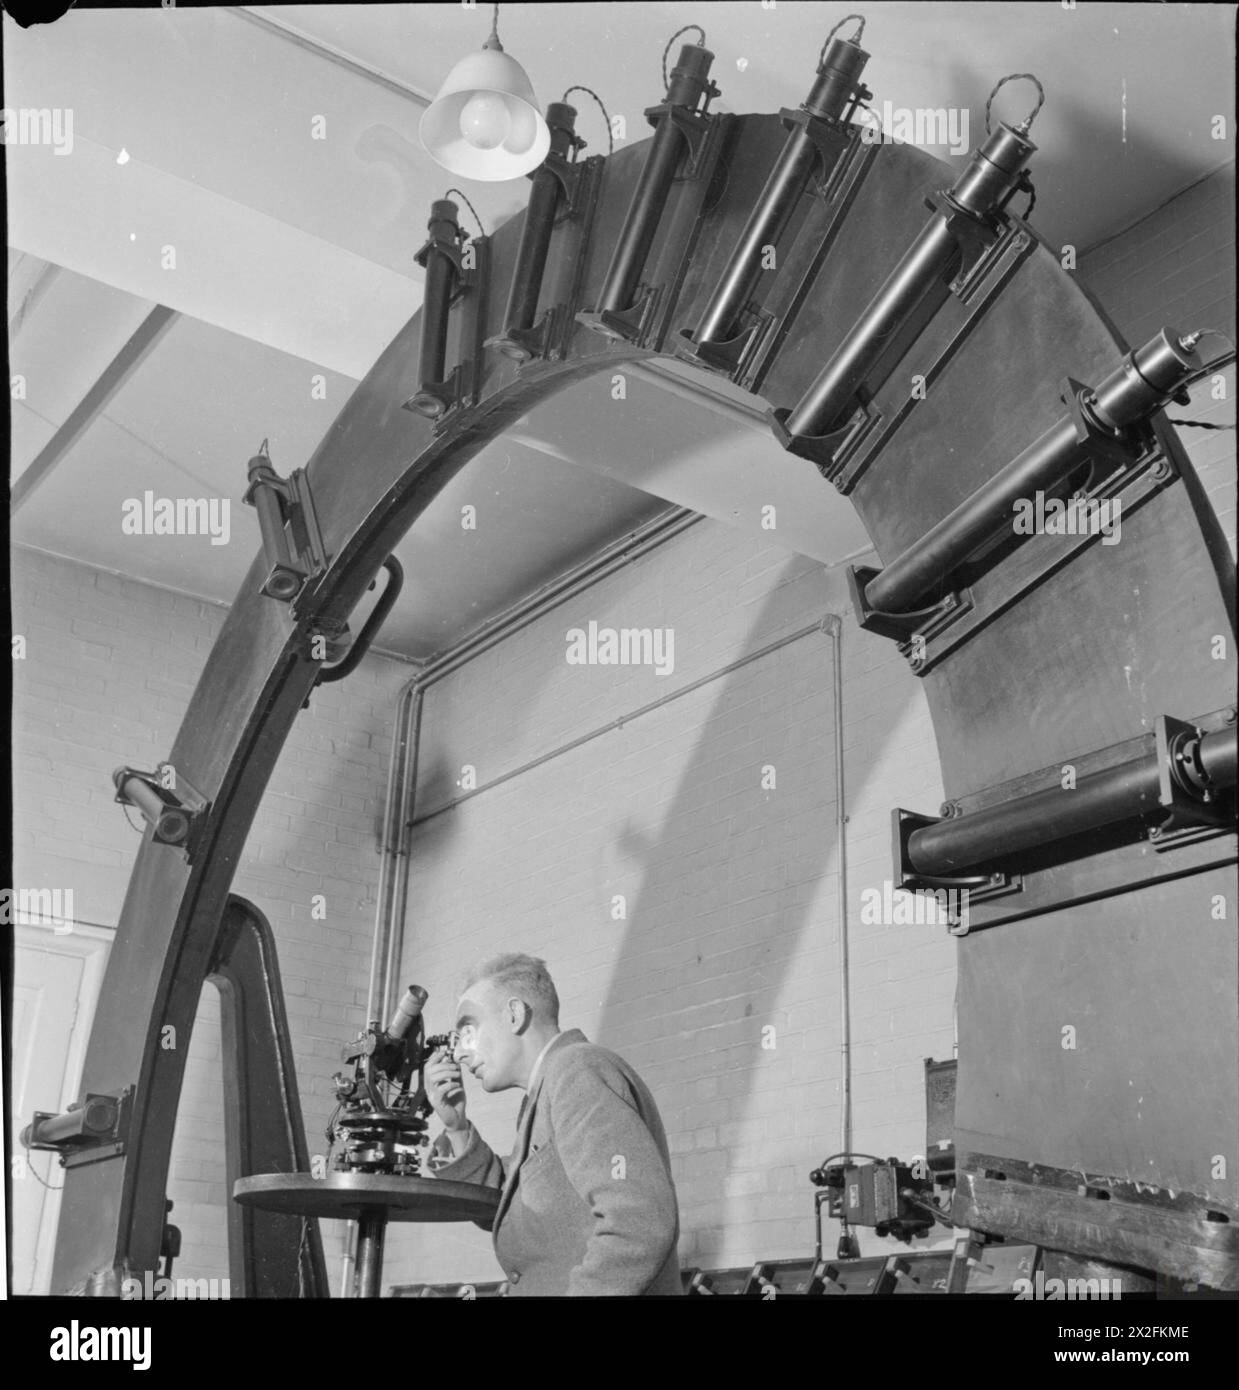 NATIONAL PHYSICAL LABORATORY: SCIENCE AND TECHNOLOGY IN WARTIME, TEDDINGTON, MIDDLESEX, ENGLAND, UK, 1944 - In the Optics Section of the Light Division at the National Physical Laboratory in Teddington, a scientist tests the angular scale of a sextant using a large wheel-like piece of apparatus, which is arranged vertically for economy of space Stock Photo